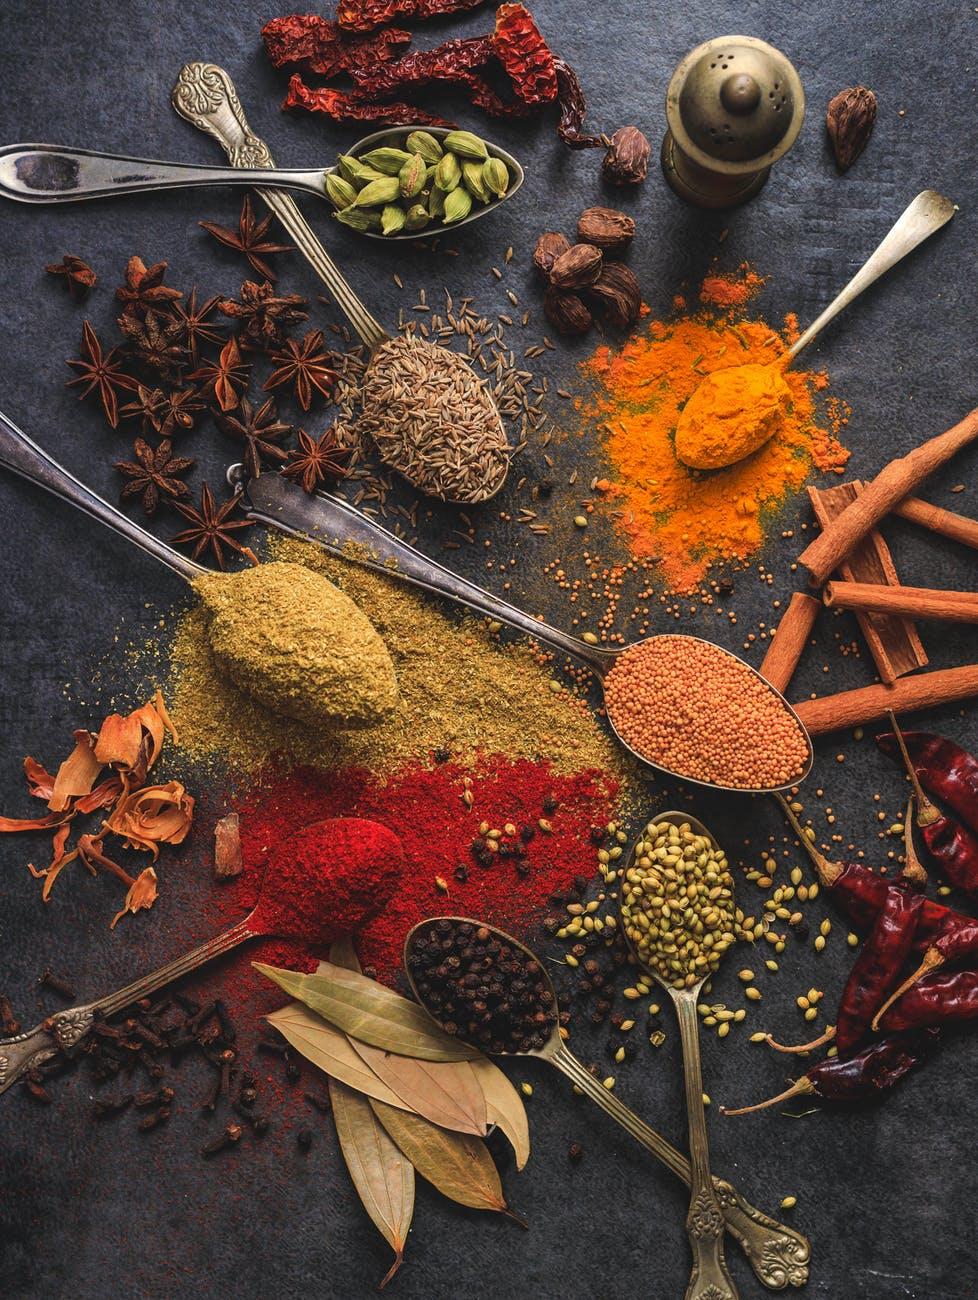 An assortment of various spices